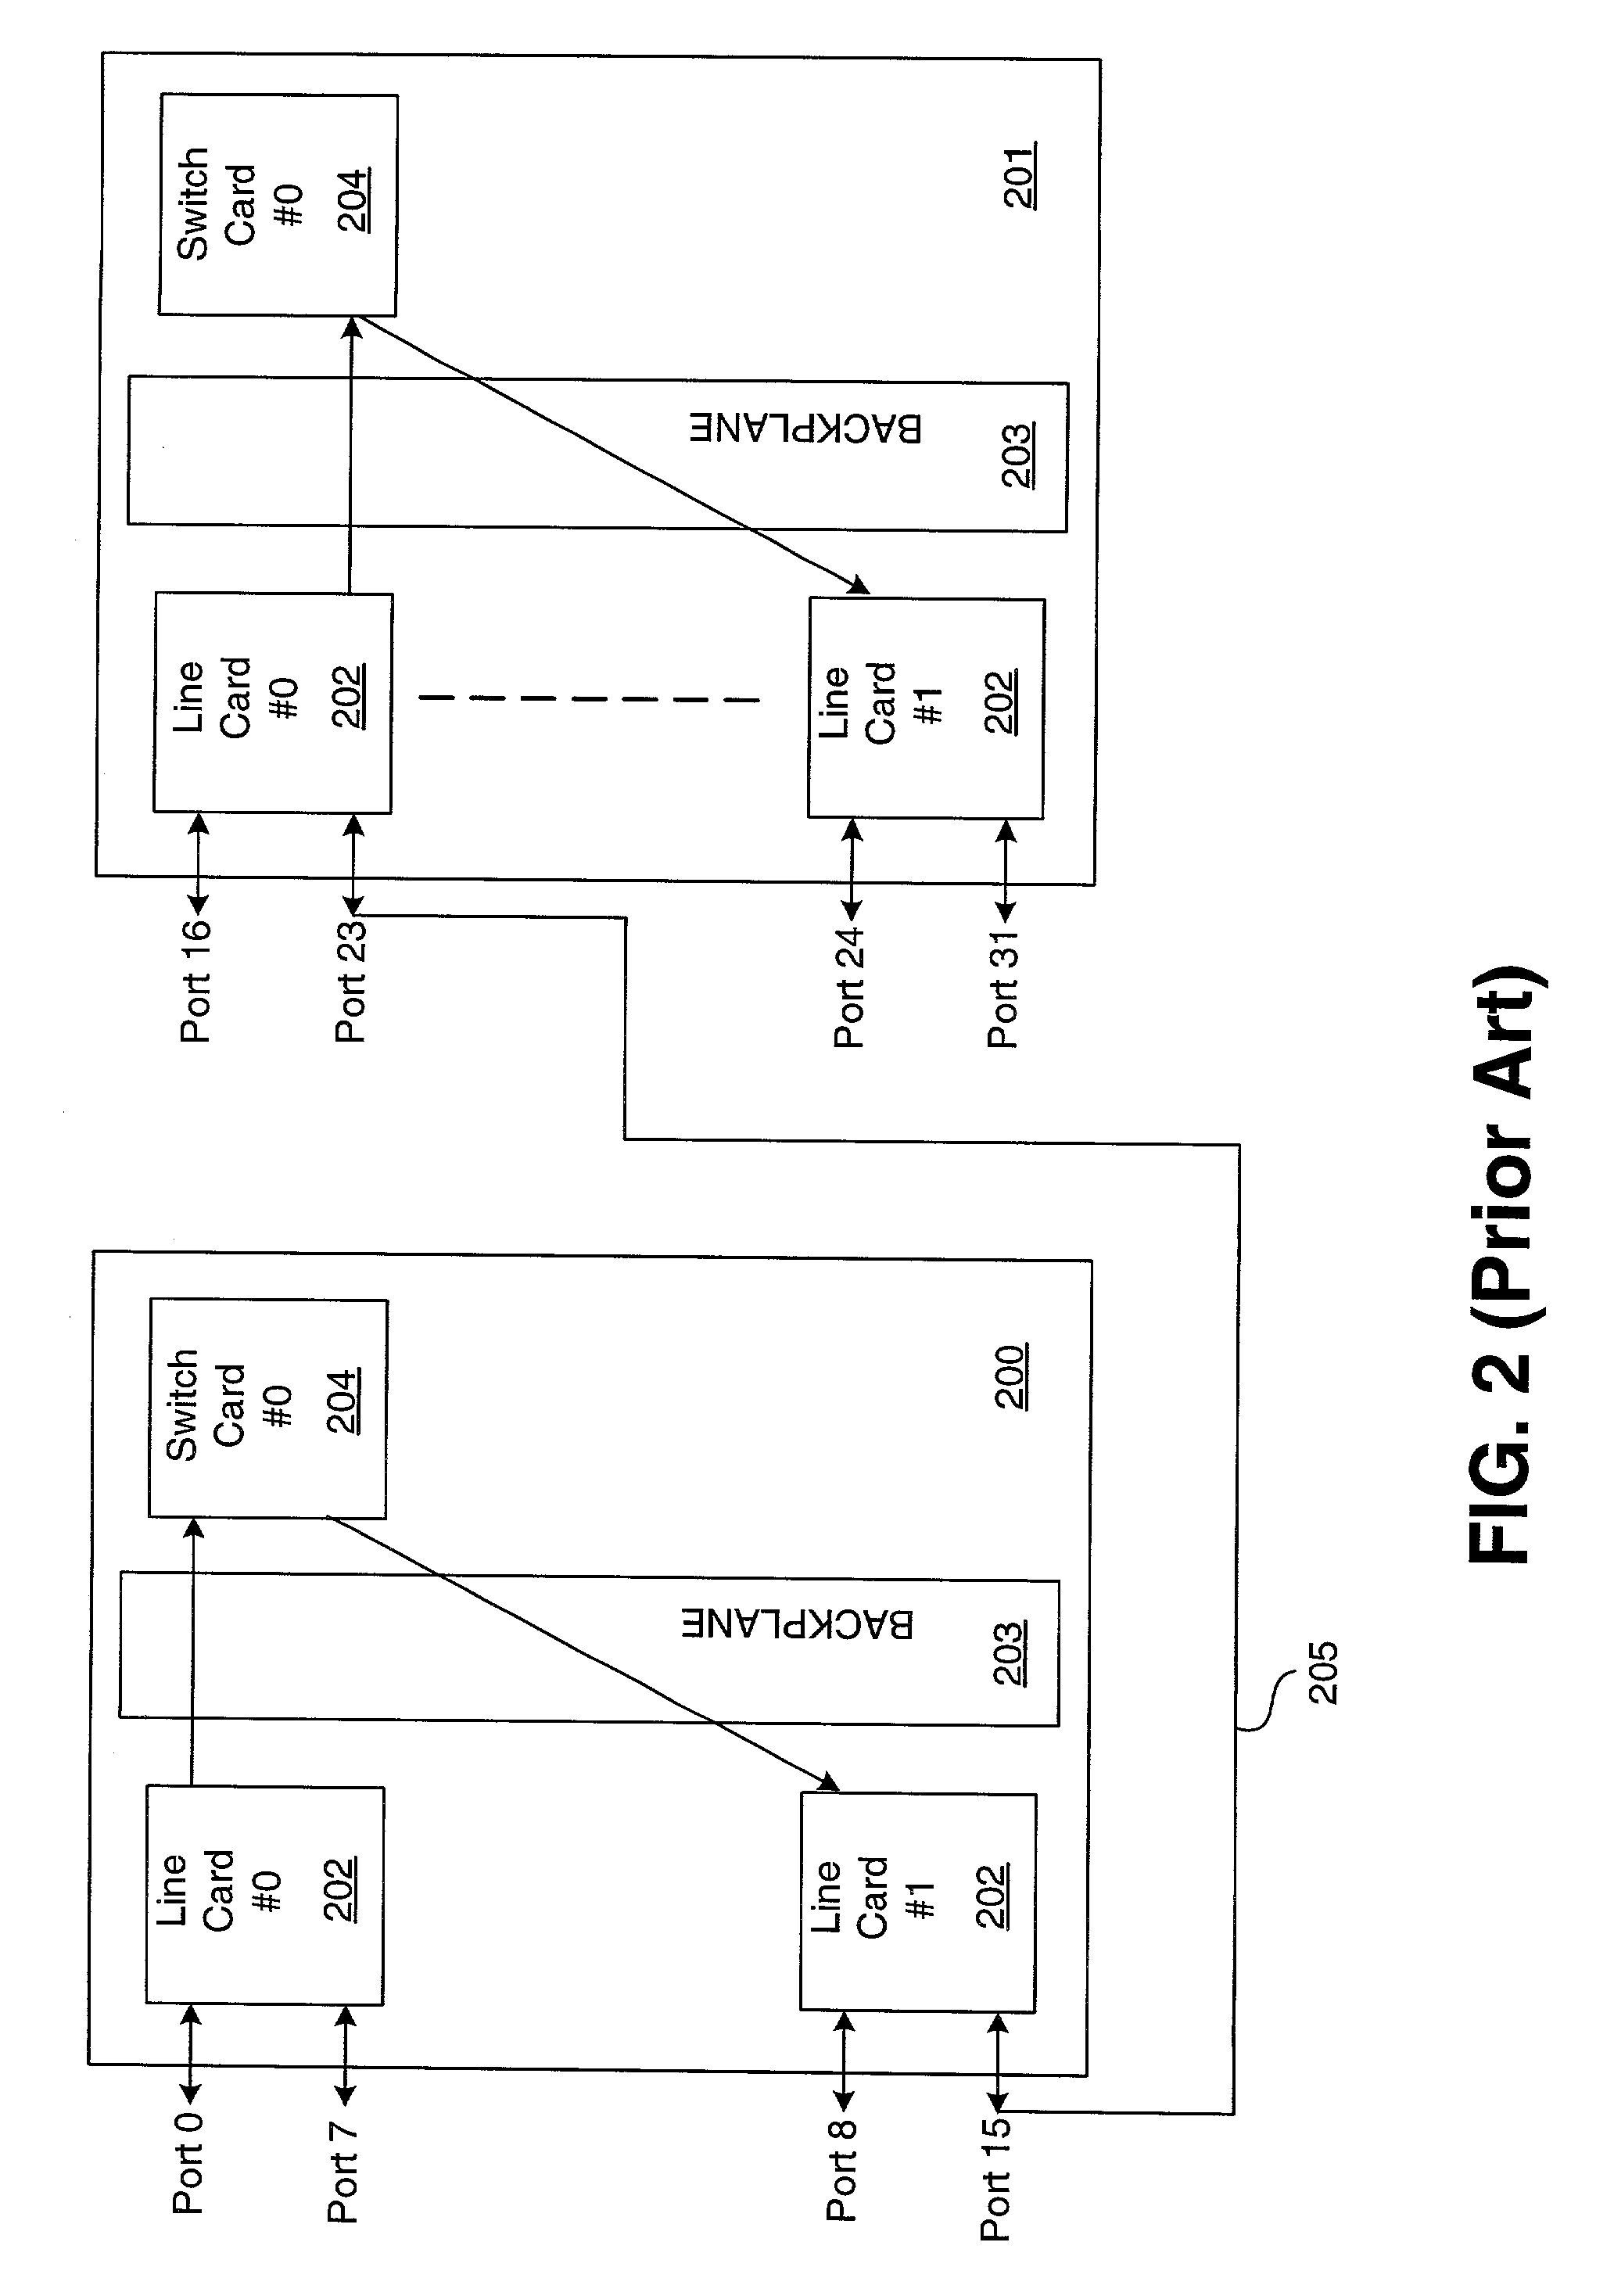 Packet switching apparatus including cascade ports and method for switching packets